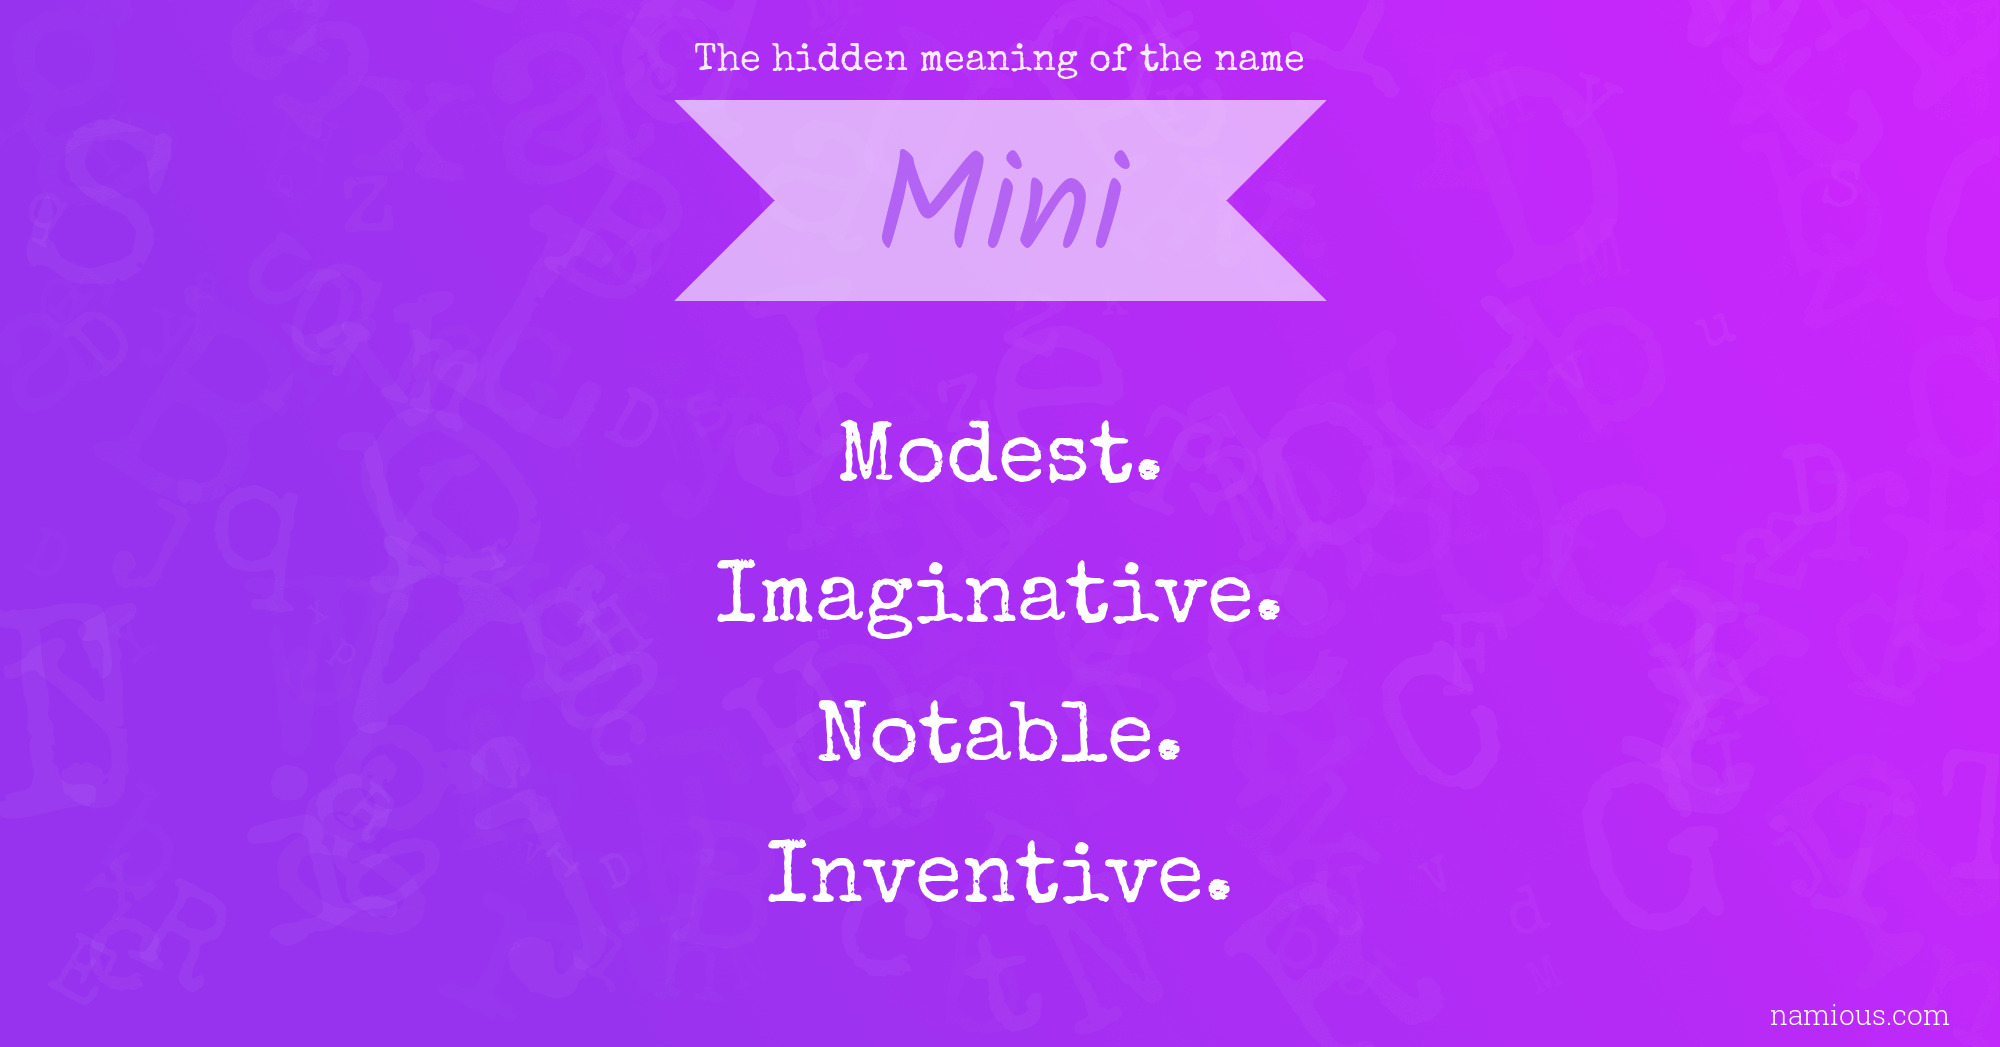 The hidden meaning of the name Mini